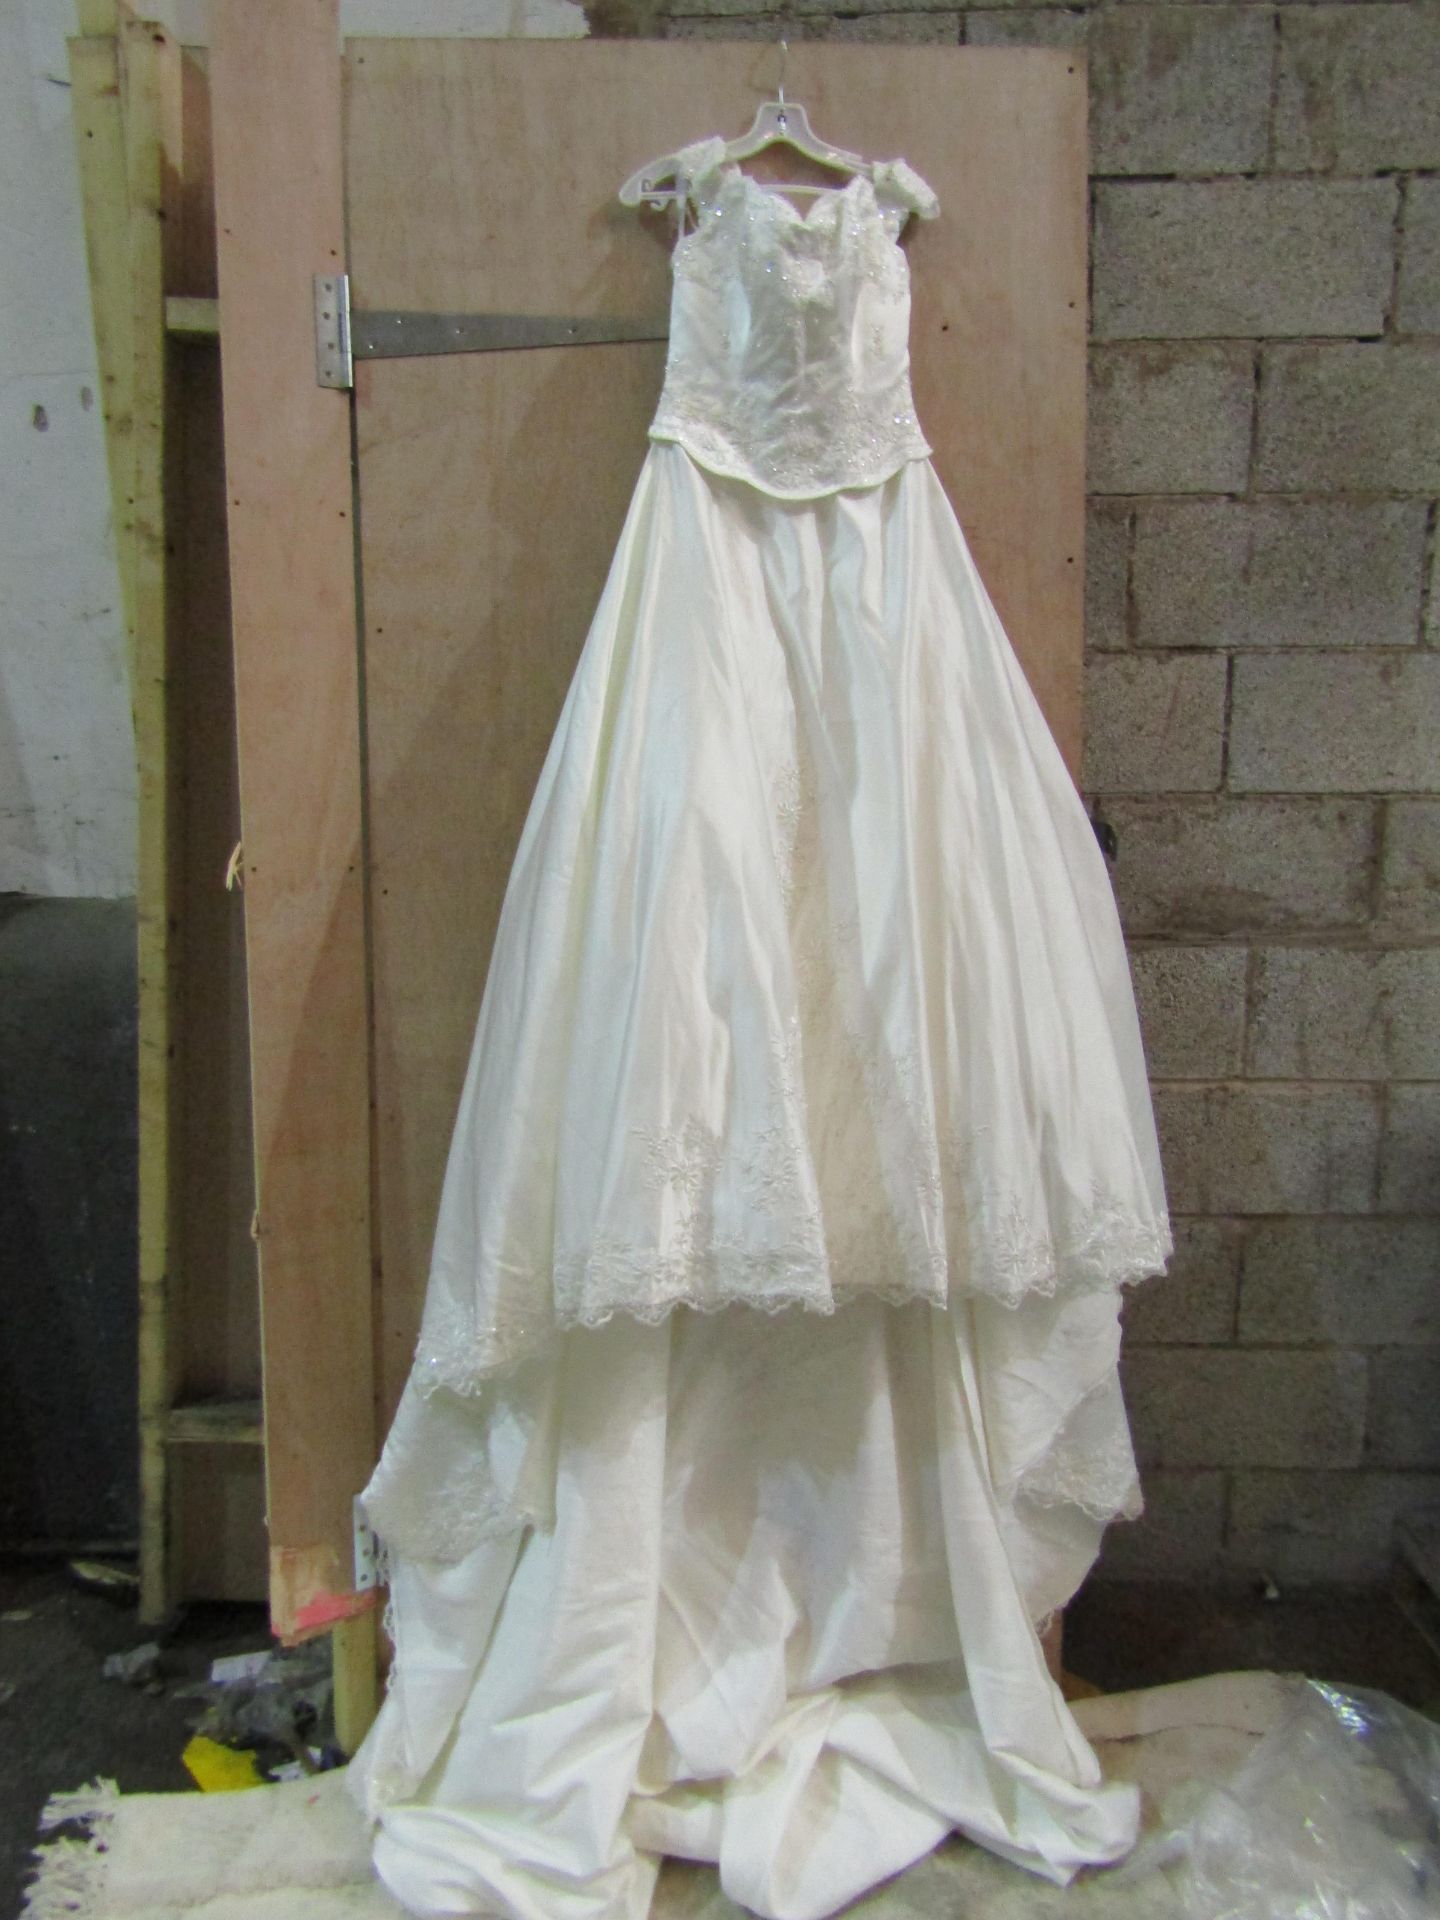 Approx 500 pieces of wedding shop stock to include wedding dresses, mother of the bride, dresses, - Image 79 of 108